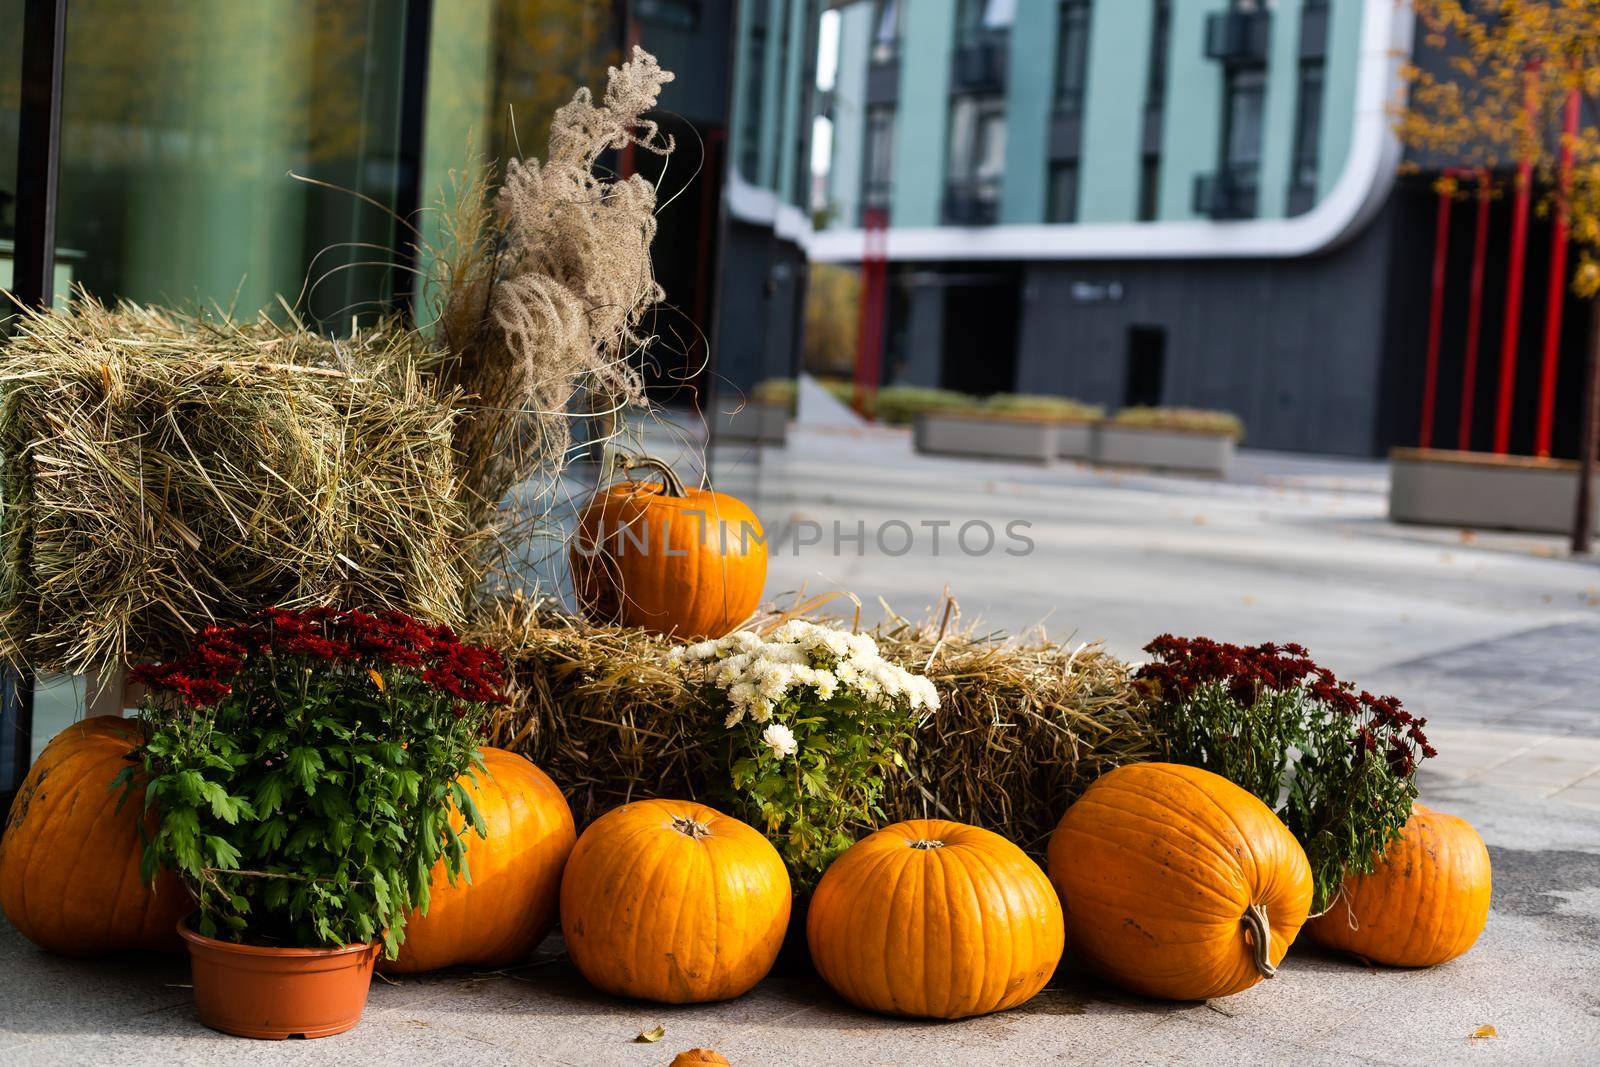 Halloween street decoration. Tiny orange pumpkins hanging on the rope. Florist's daisy flowers in a bucket. Autumn outdoor decorations made of pumpkins and flowers. by Andelov13